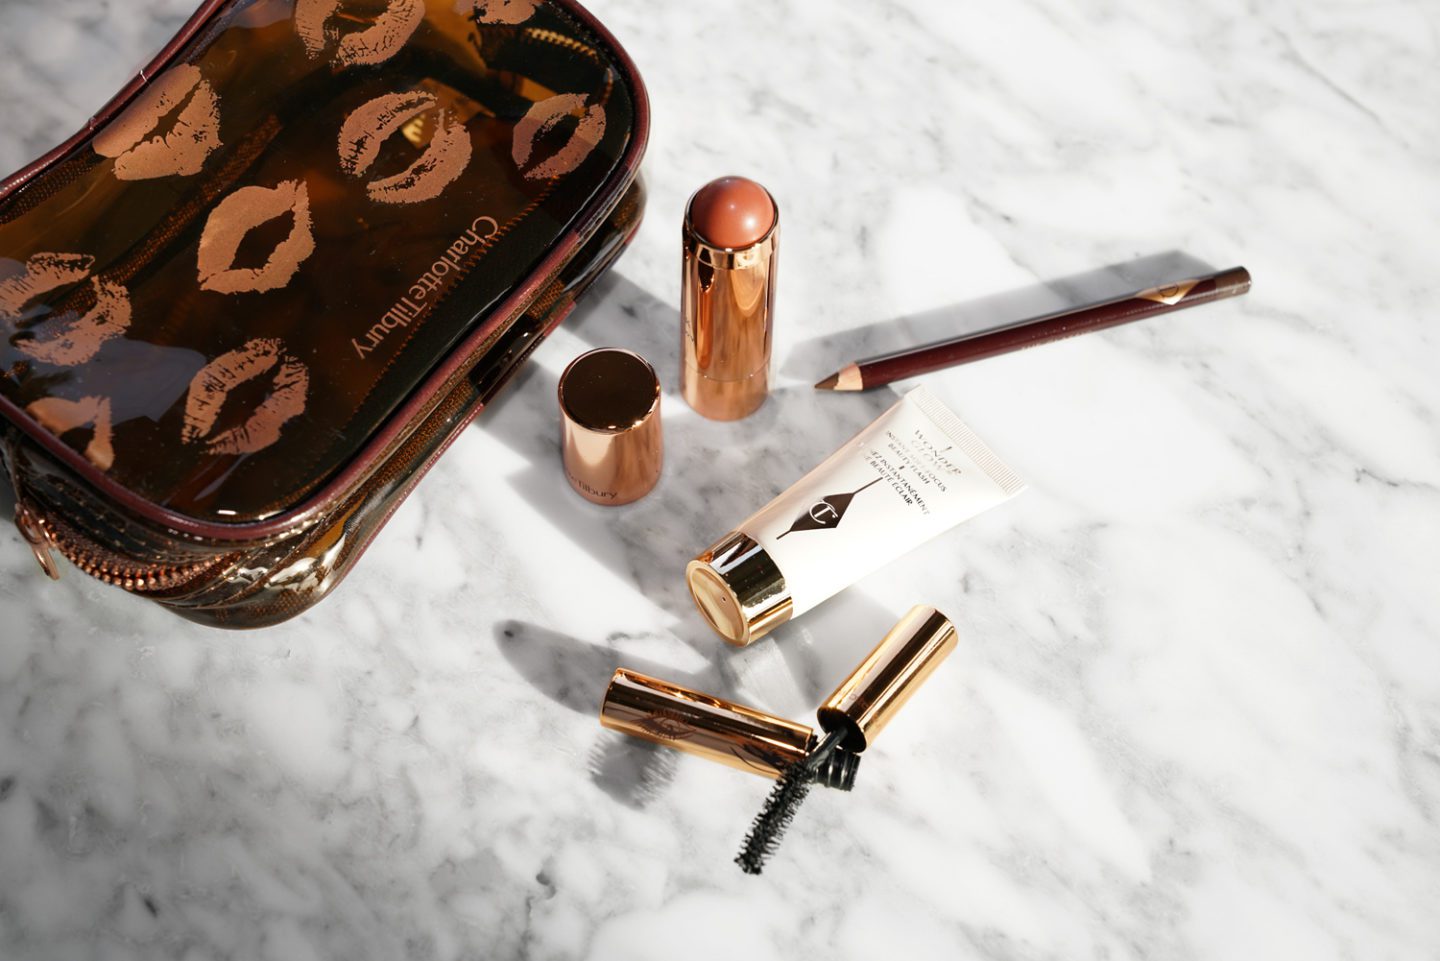 Charlotte Tilbury Quick N Easy Set Review Daytime Chic via The Beauty Look Book Blog